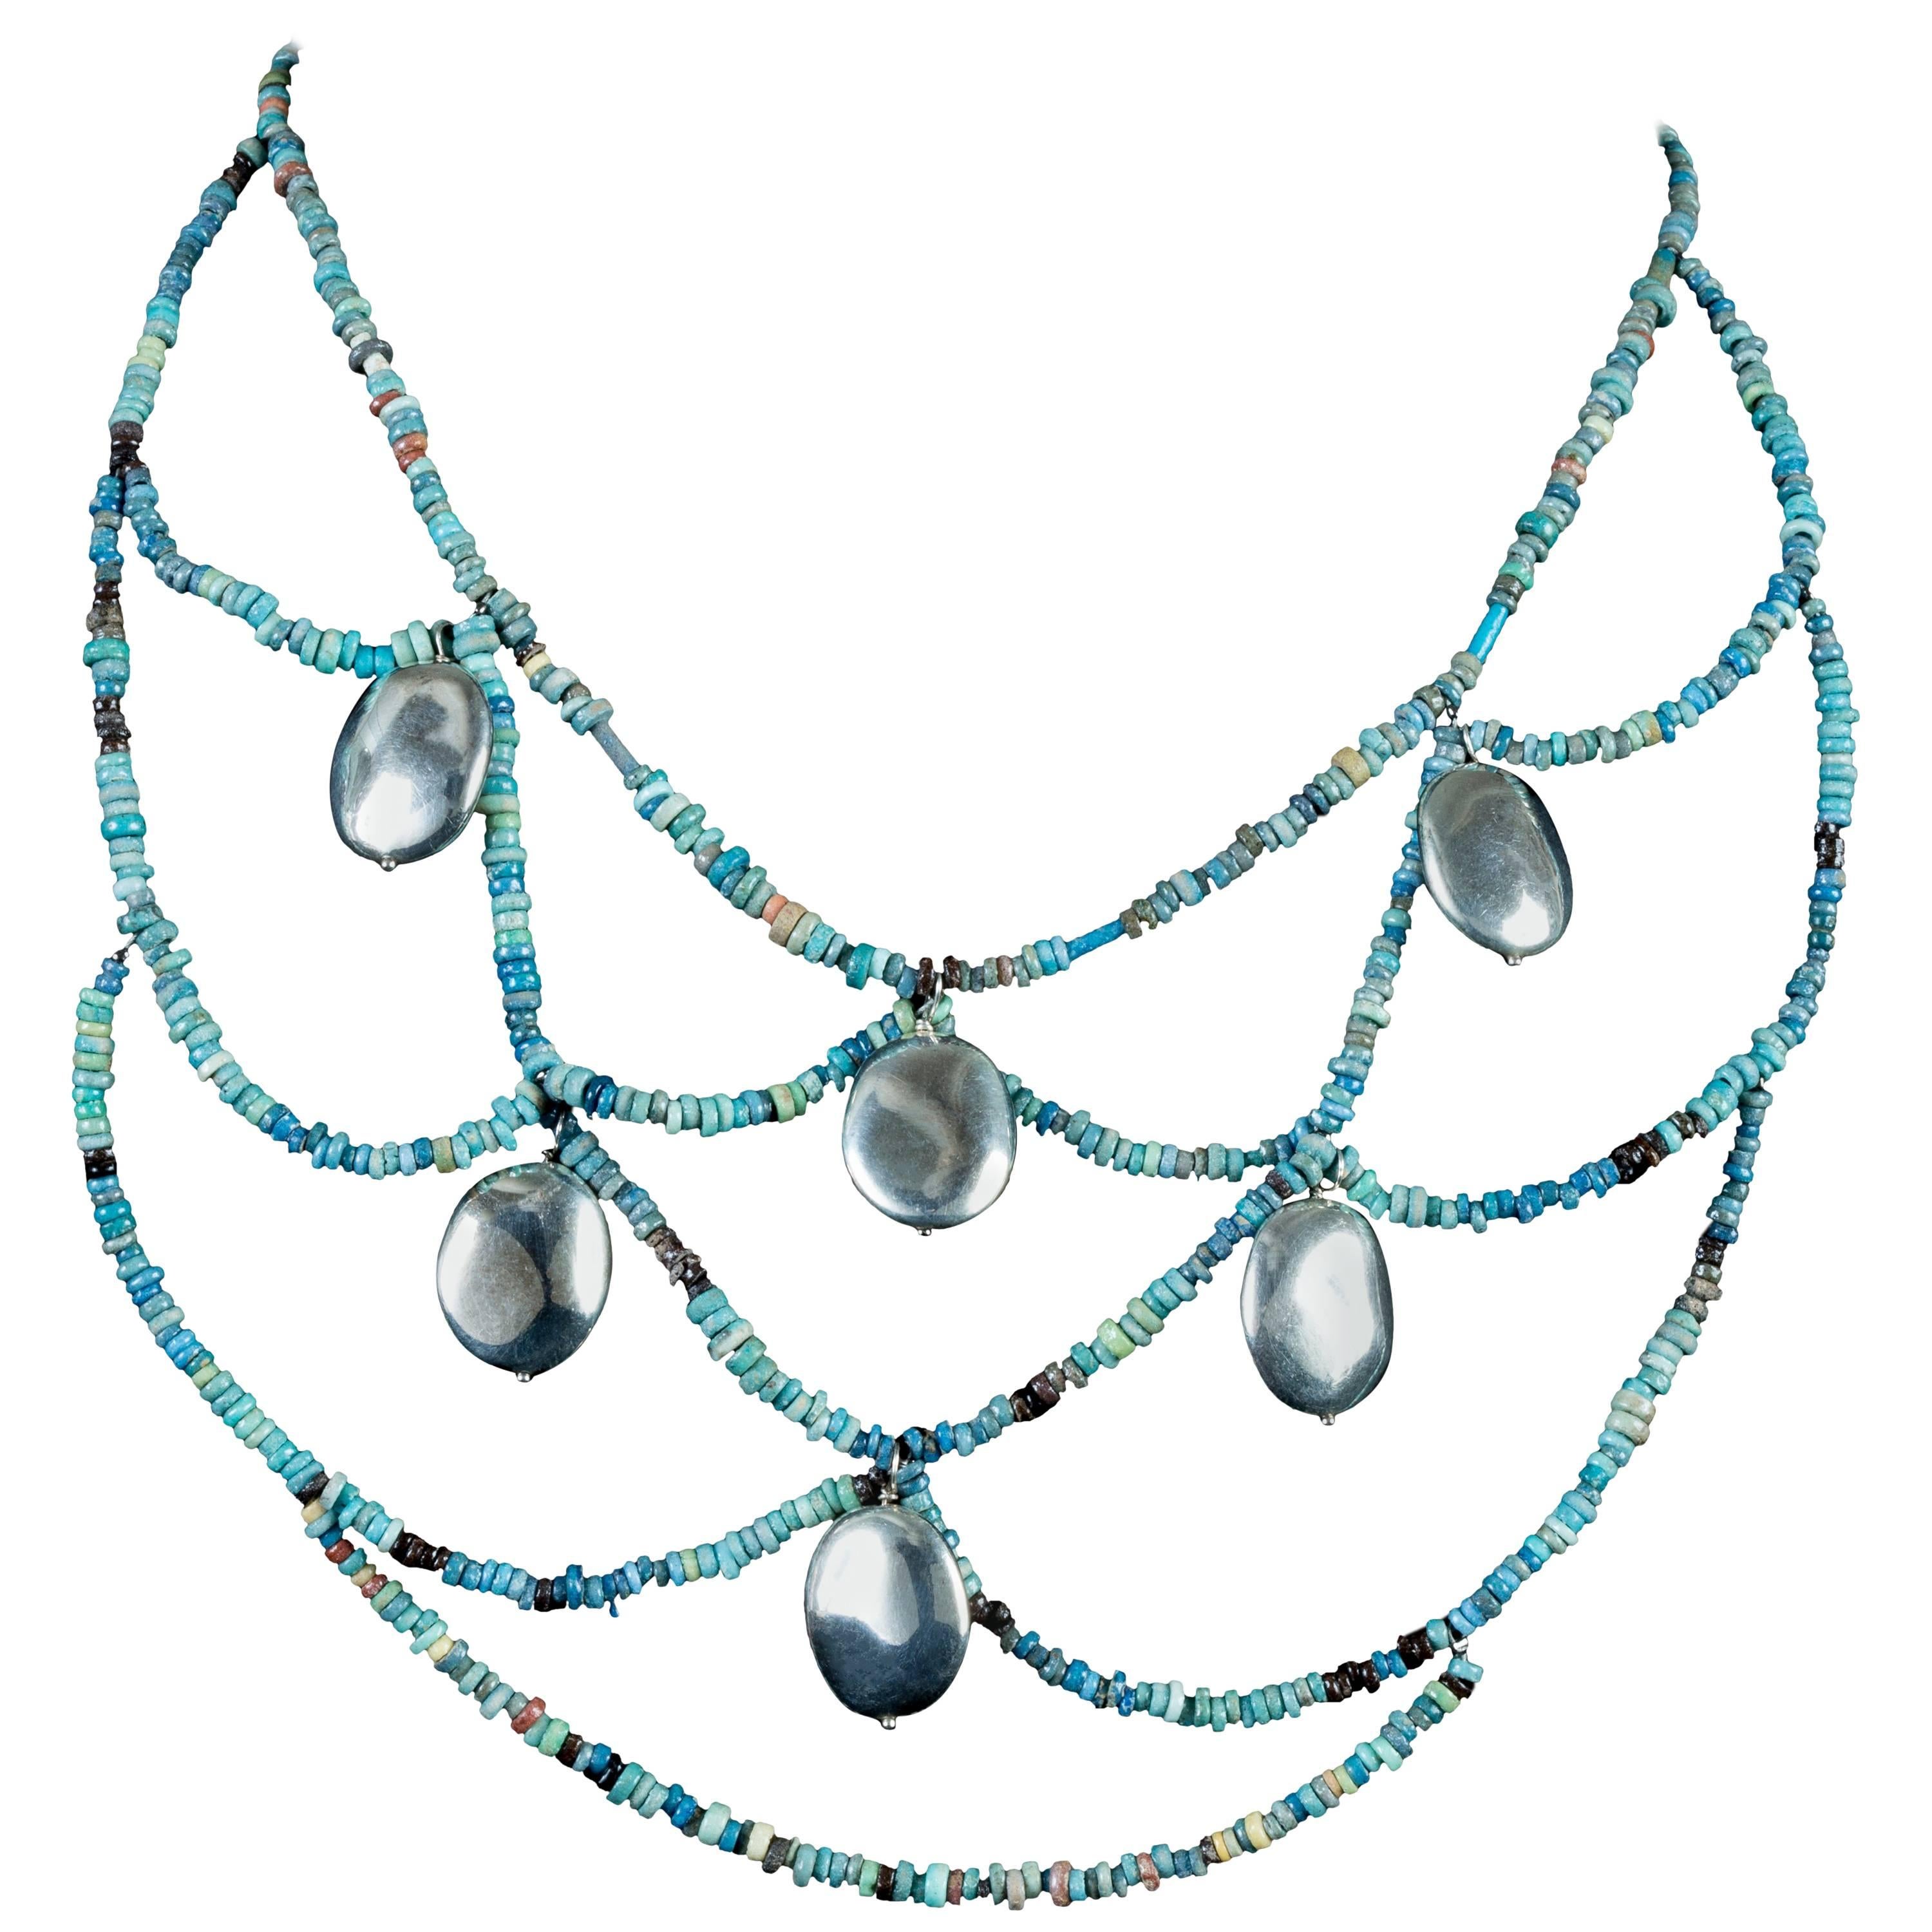 Egyptian Beads Webbed Necklace and Earrings For Sale